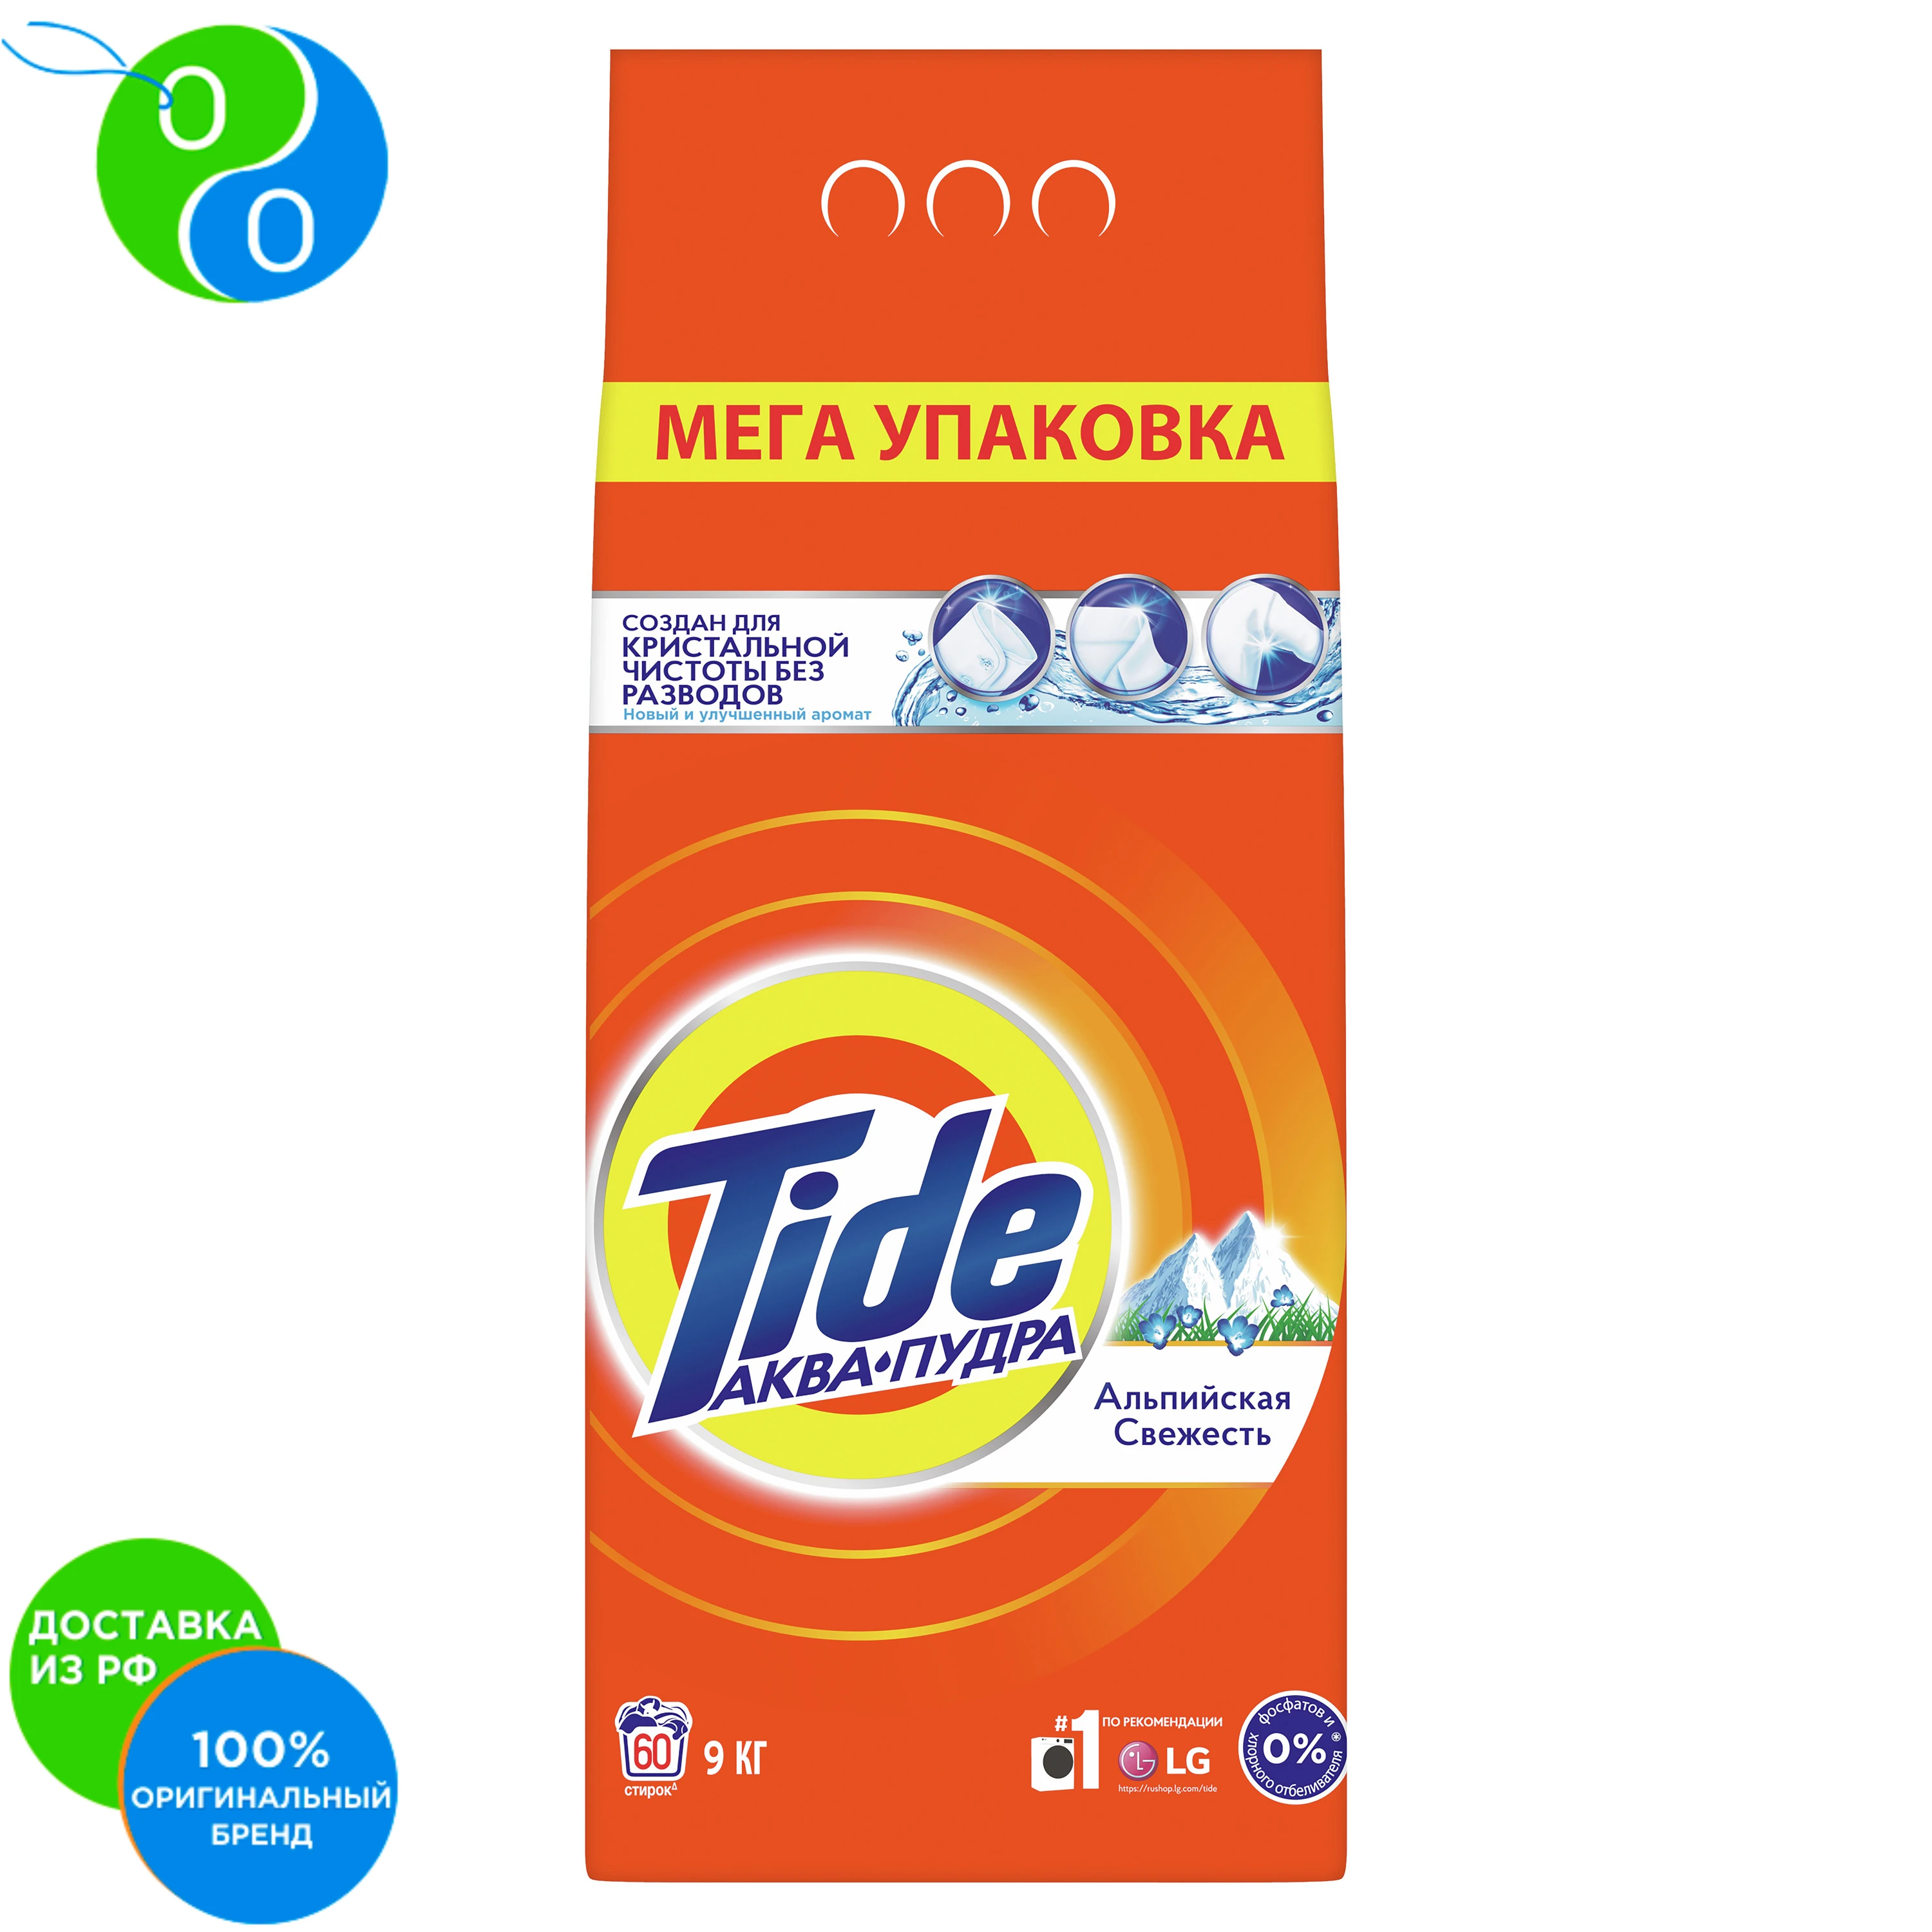 Laundry detergent Tide Automatic Alpine freshness washings 60 9 kg., detergent powder, laundry detergent, stain removal, washing powder